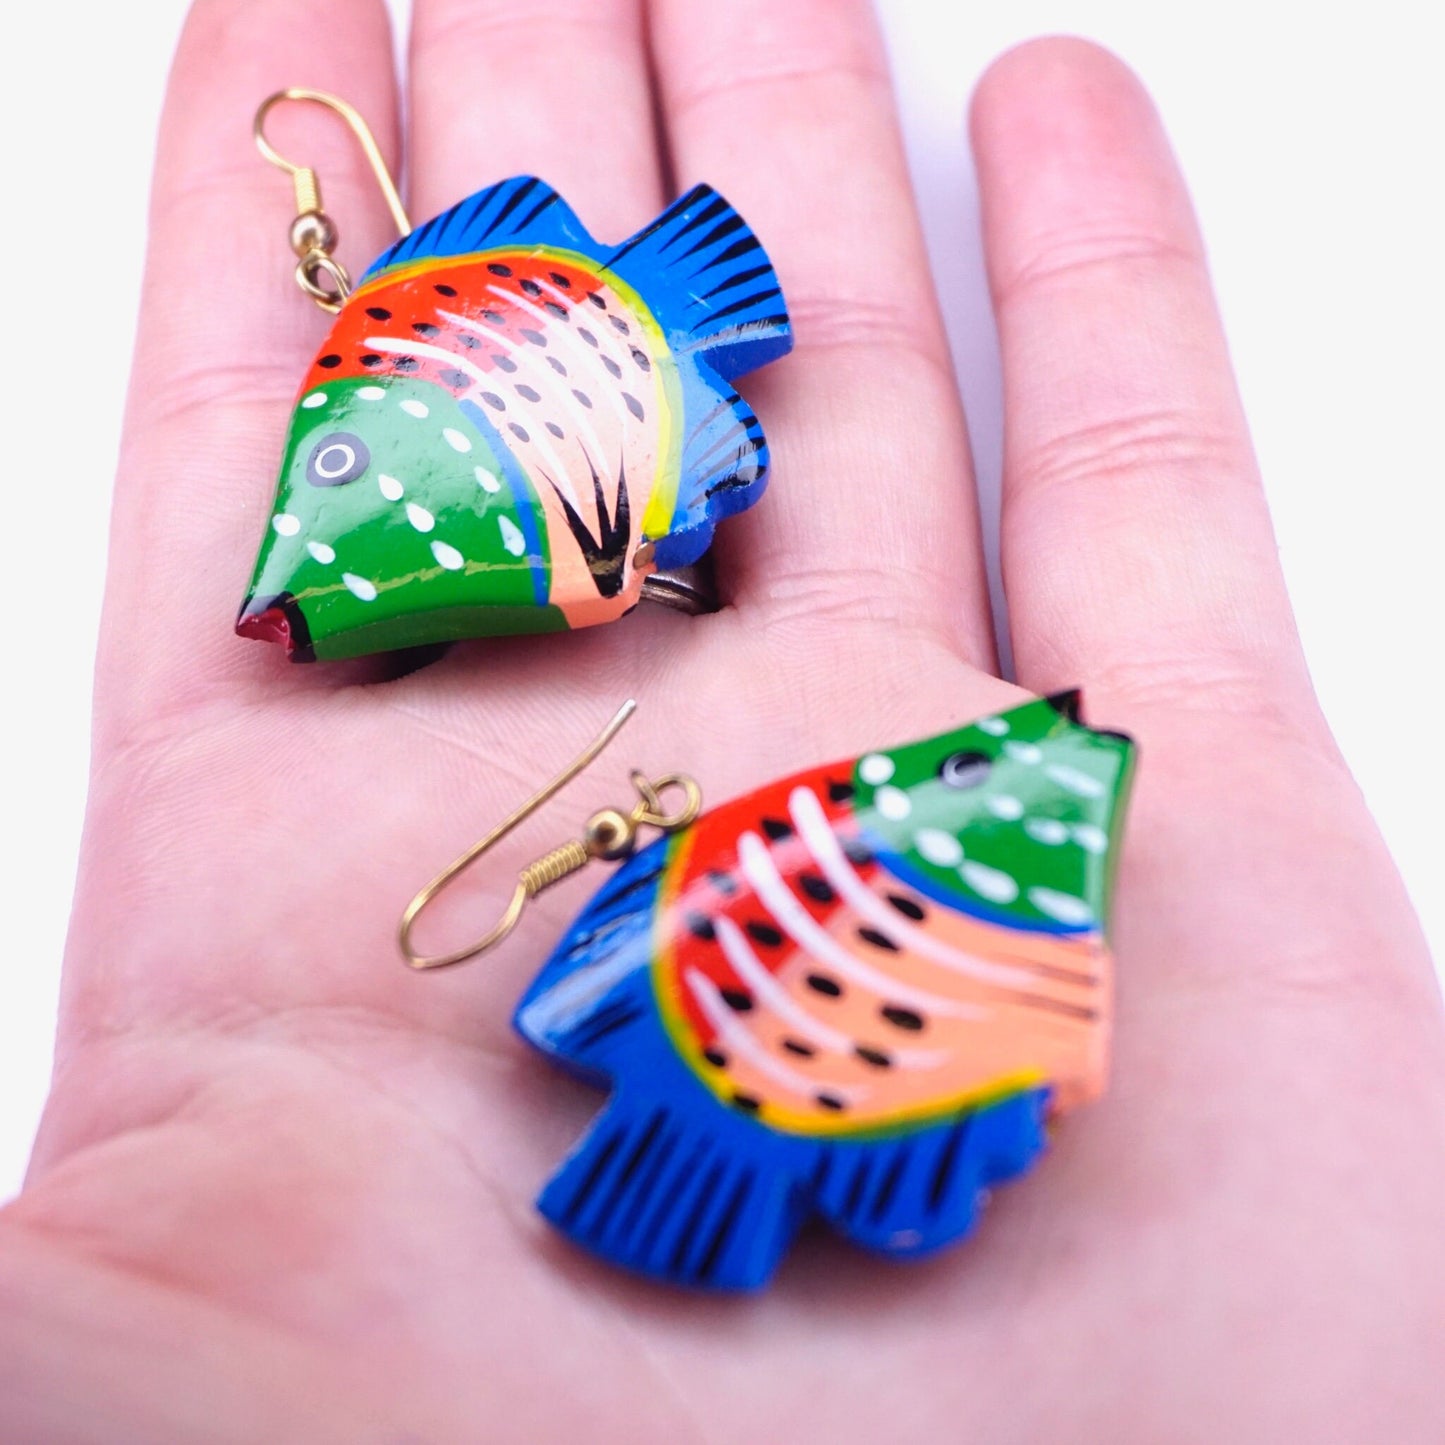 Hand holding colorful vintage wood carved fish earrings with green, blue, red painting and gold hooks, cute painted wood dangle statement earrings